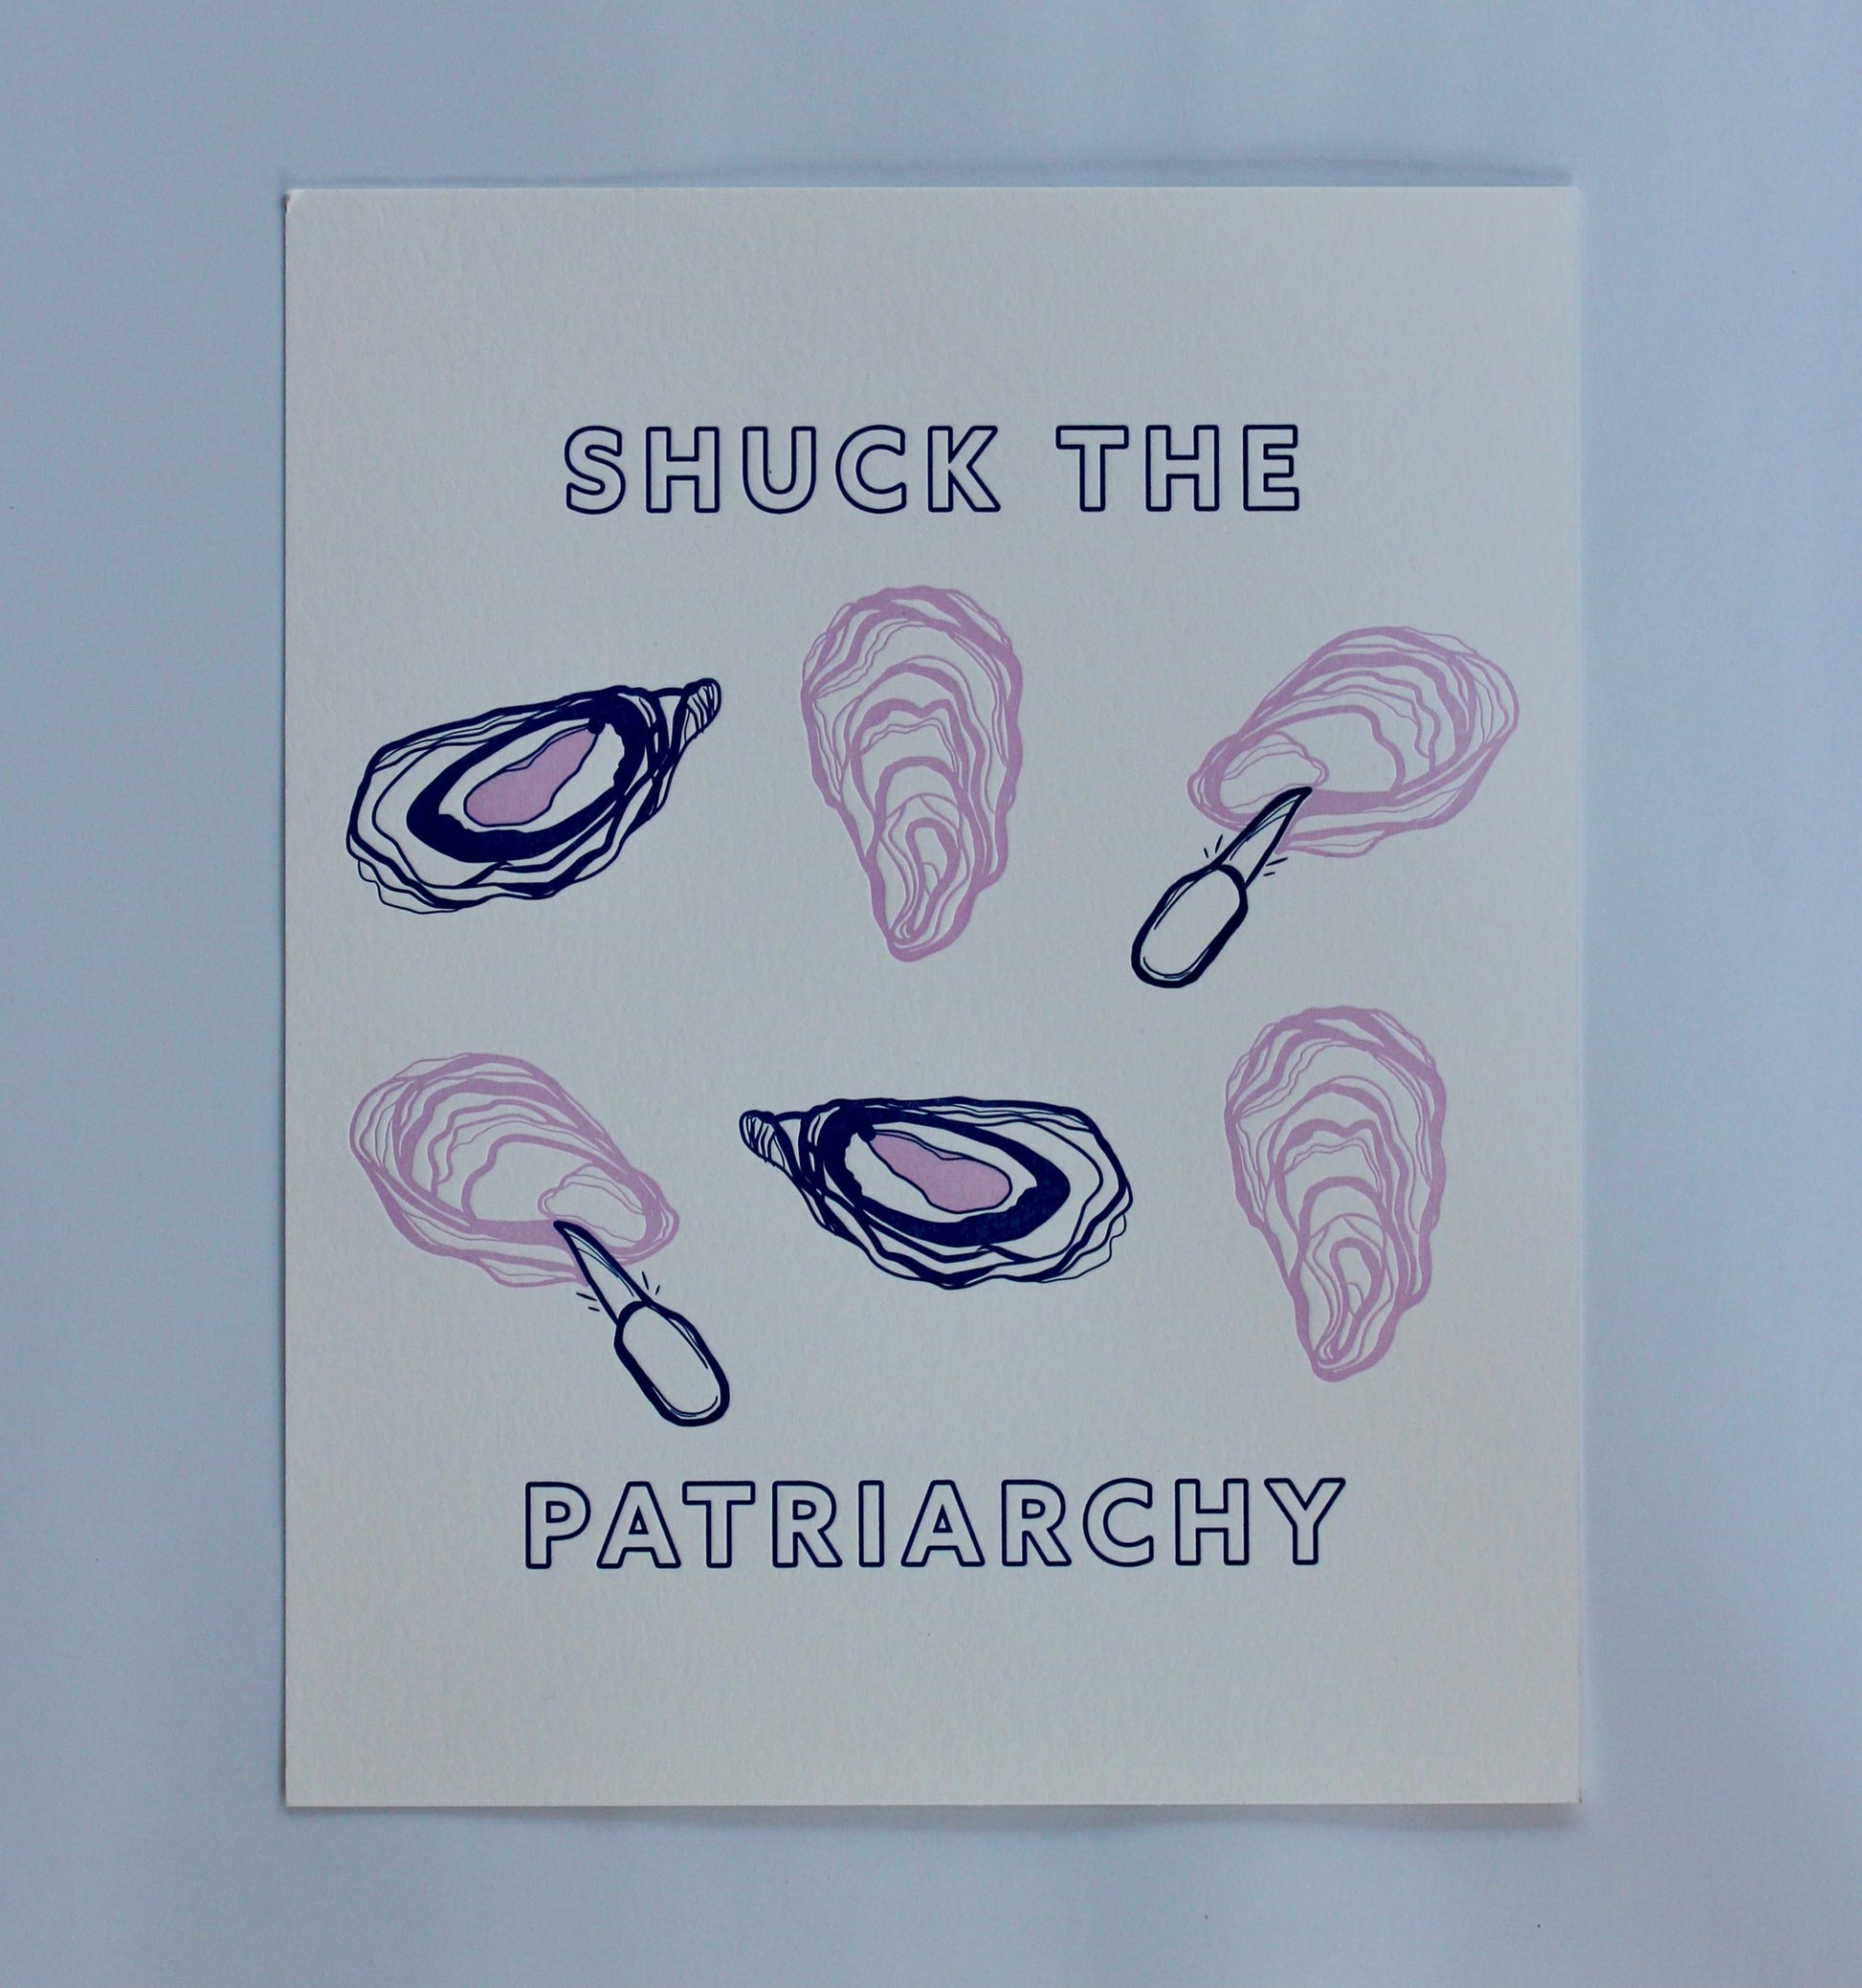 An art print reads "Shuck the Patriarchy" in block letters with oyster illustrations 